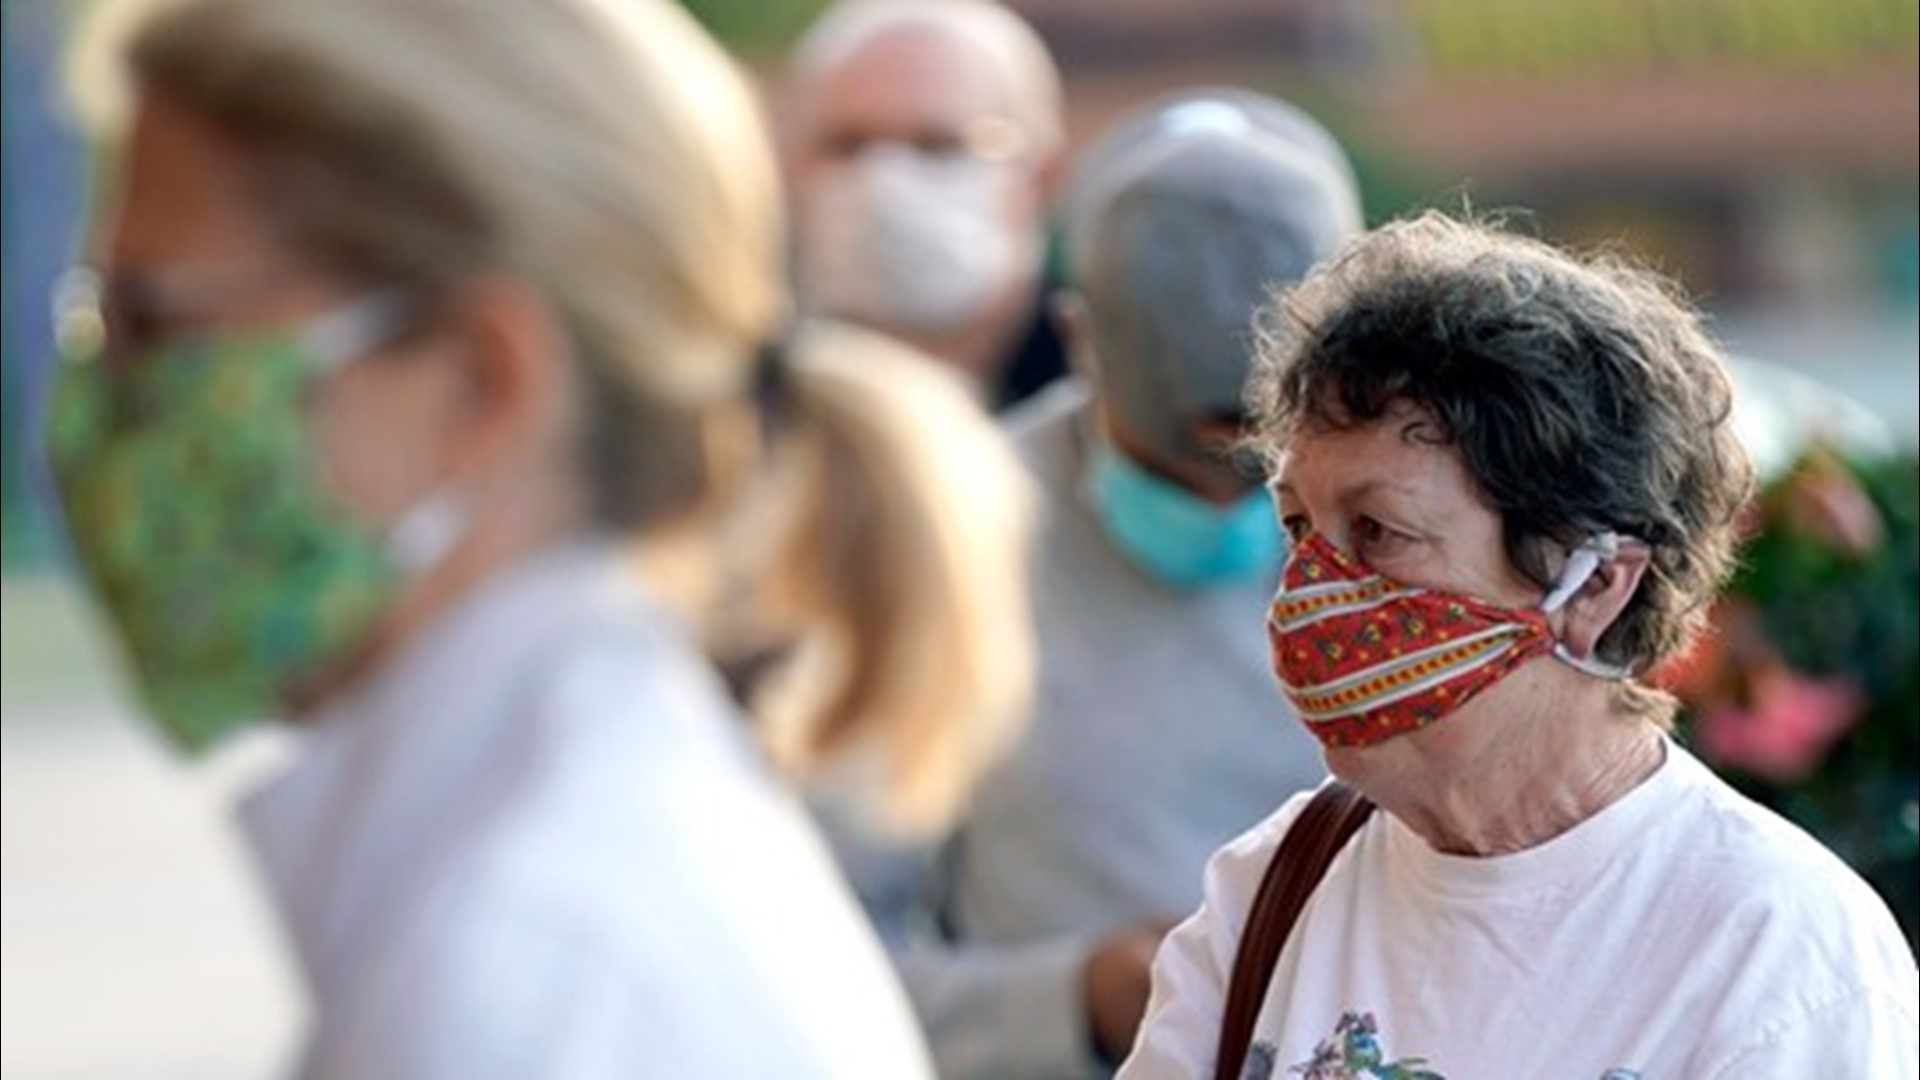 On Friday, the Centers for Disease Control and Prevention said healthy Americans can take a break from wearing masks indoors.